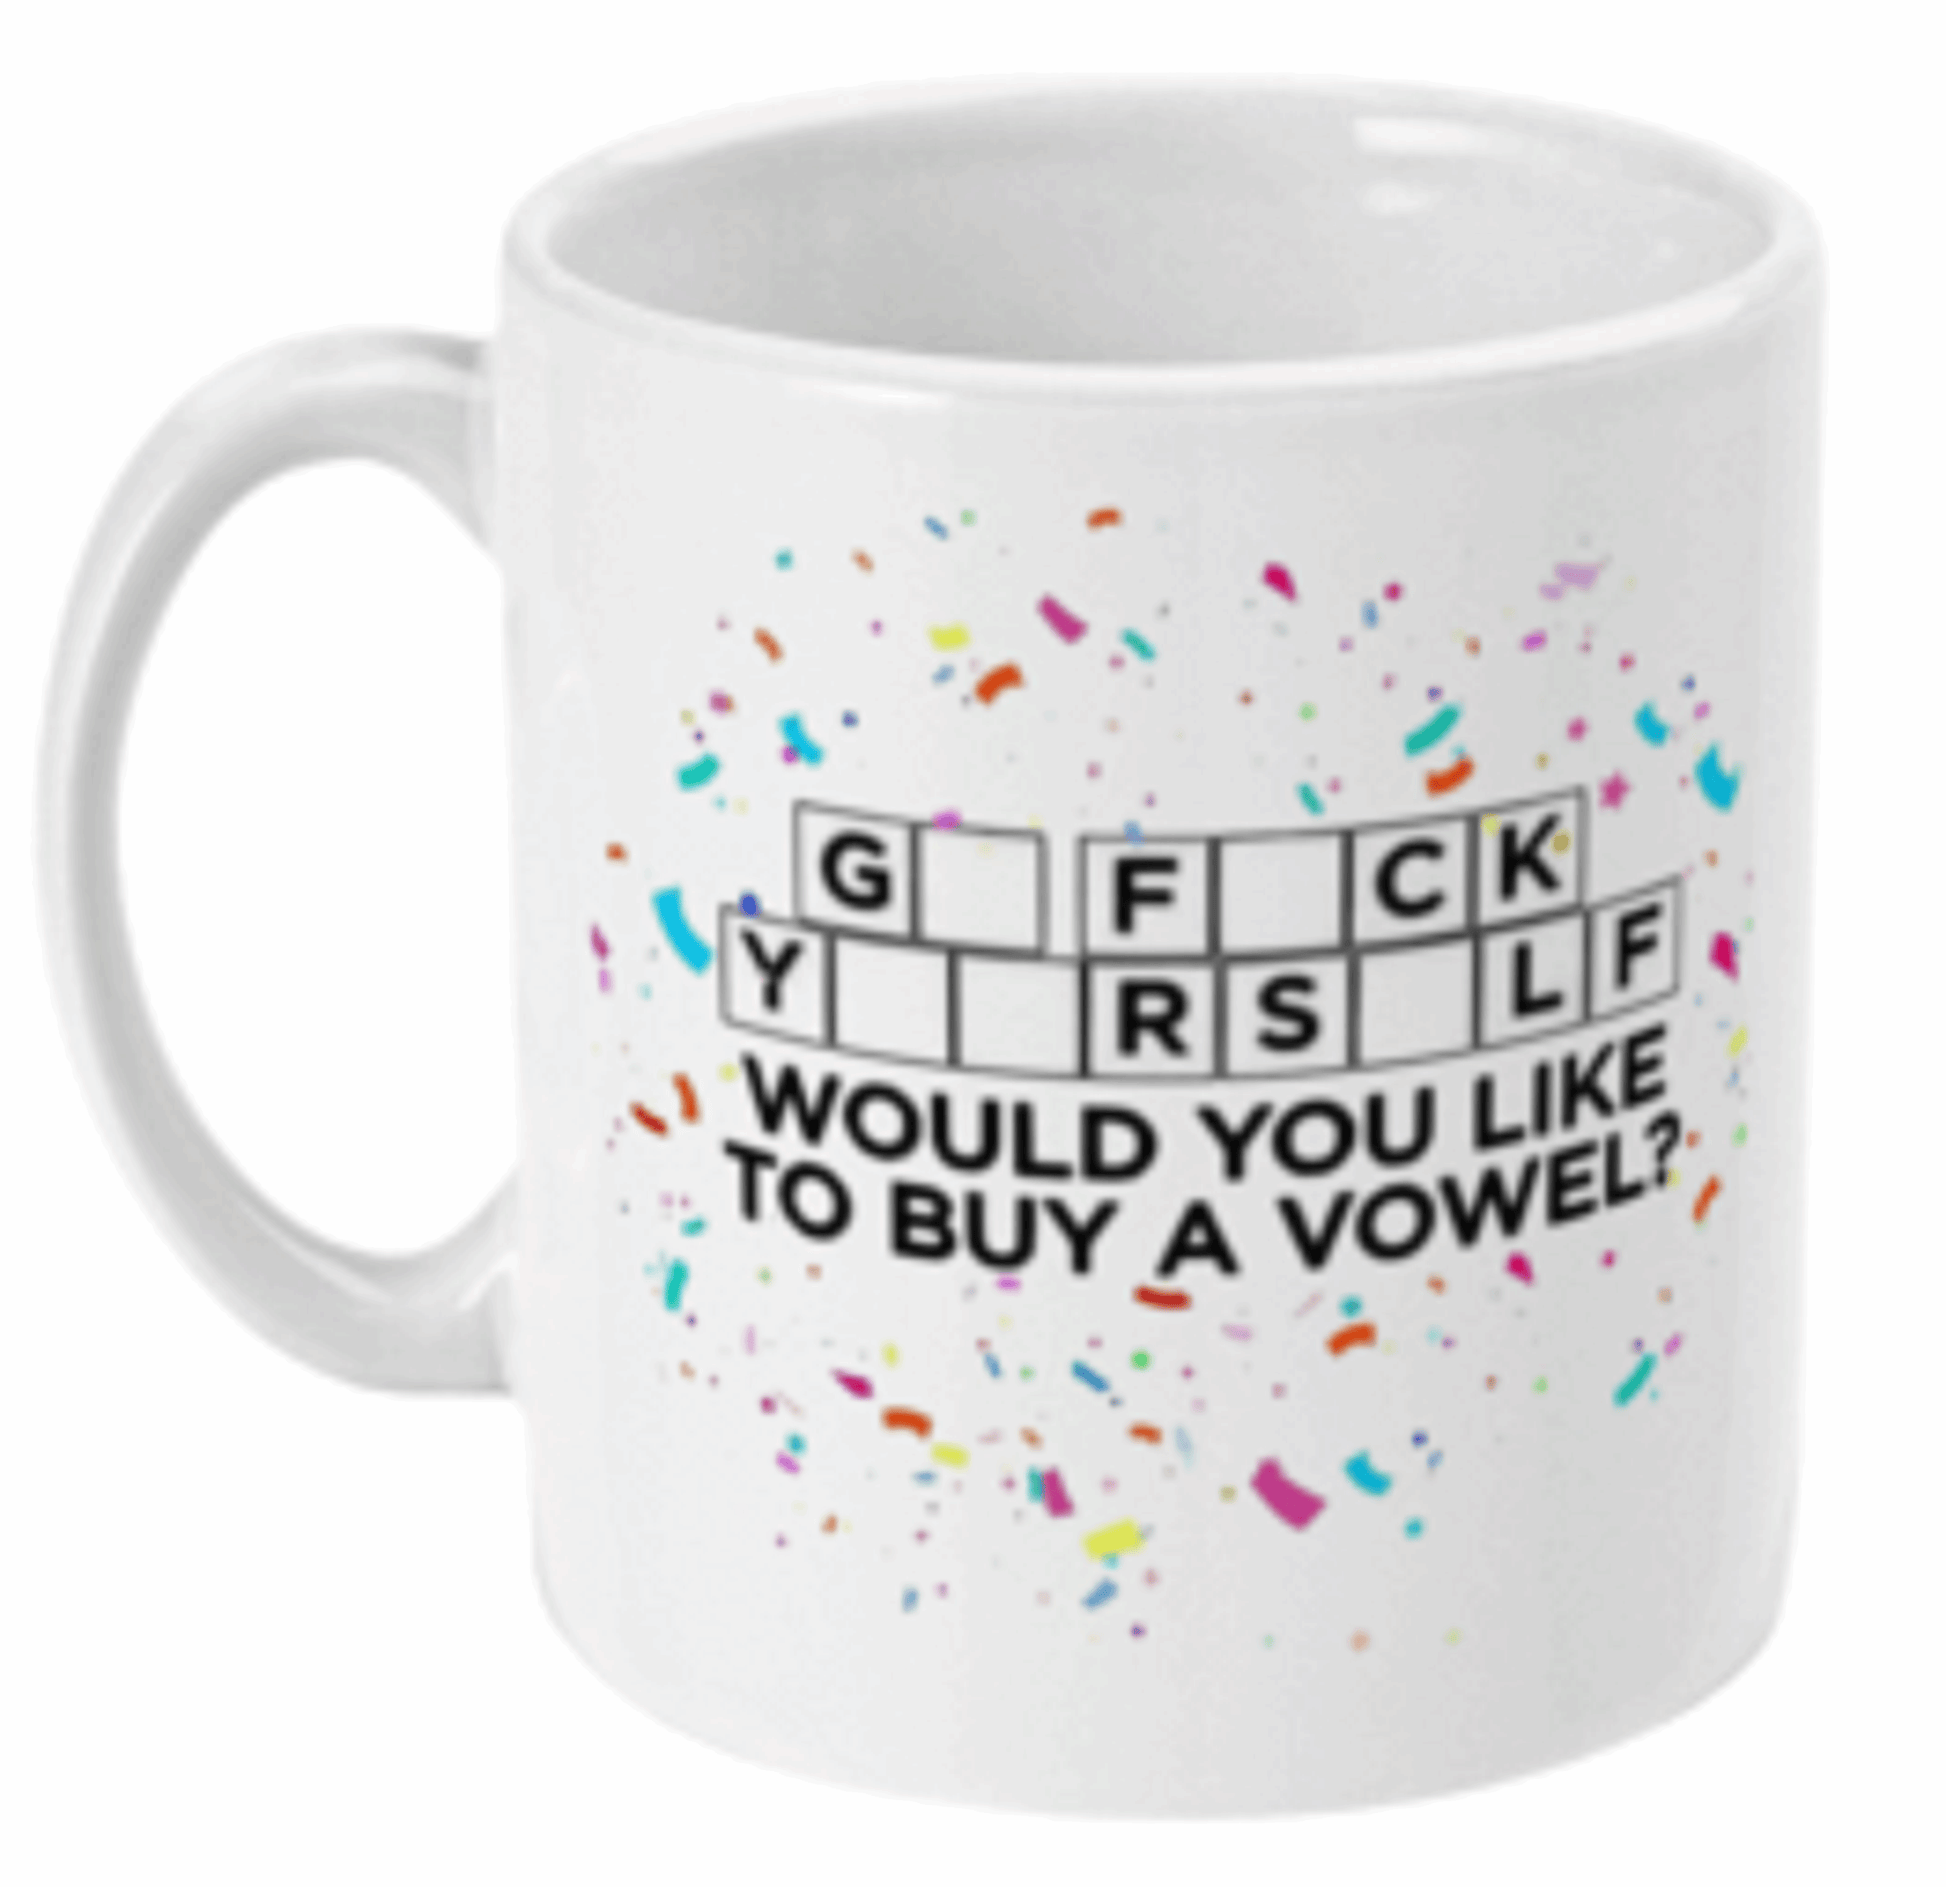  Would You Like to Buy a Vowel Funny Mug by Free Spirit Accessories sold by Free Spirit Accessories